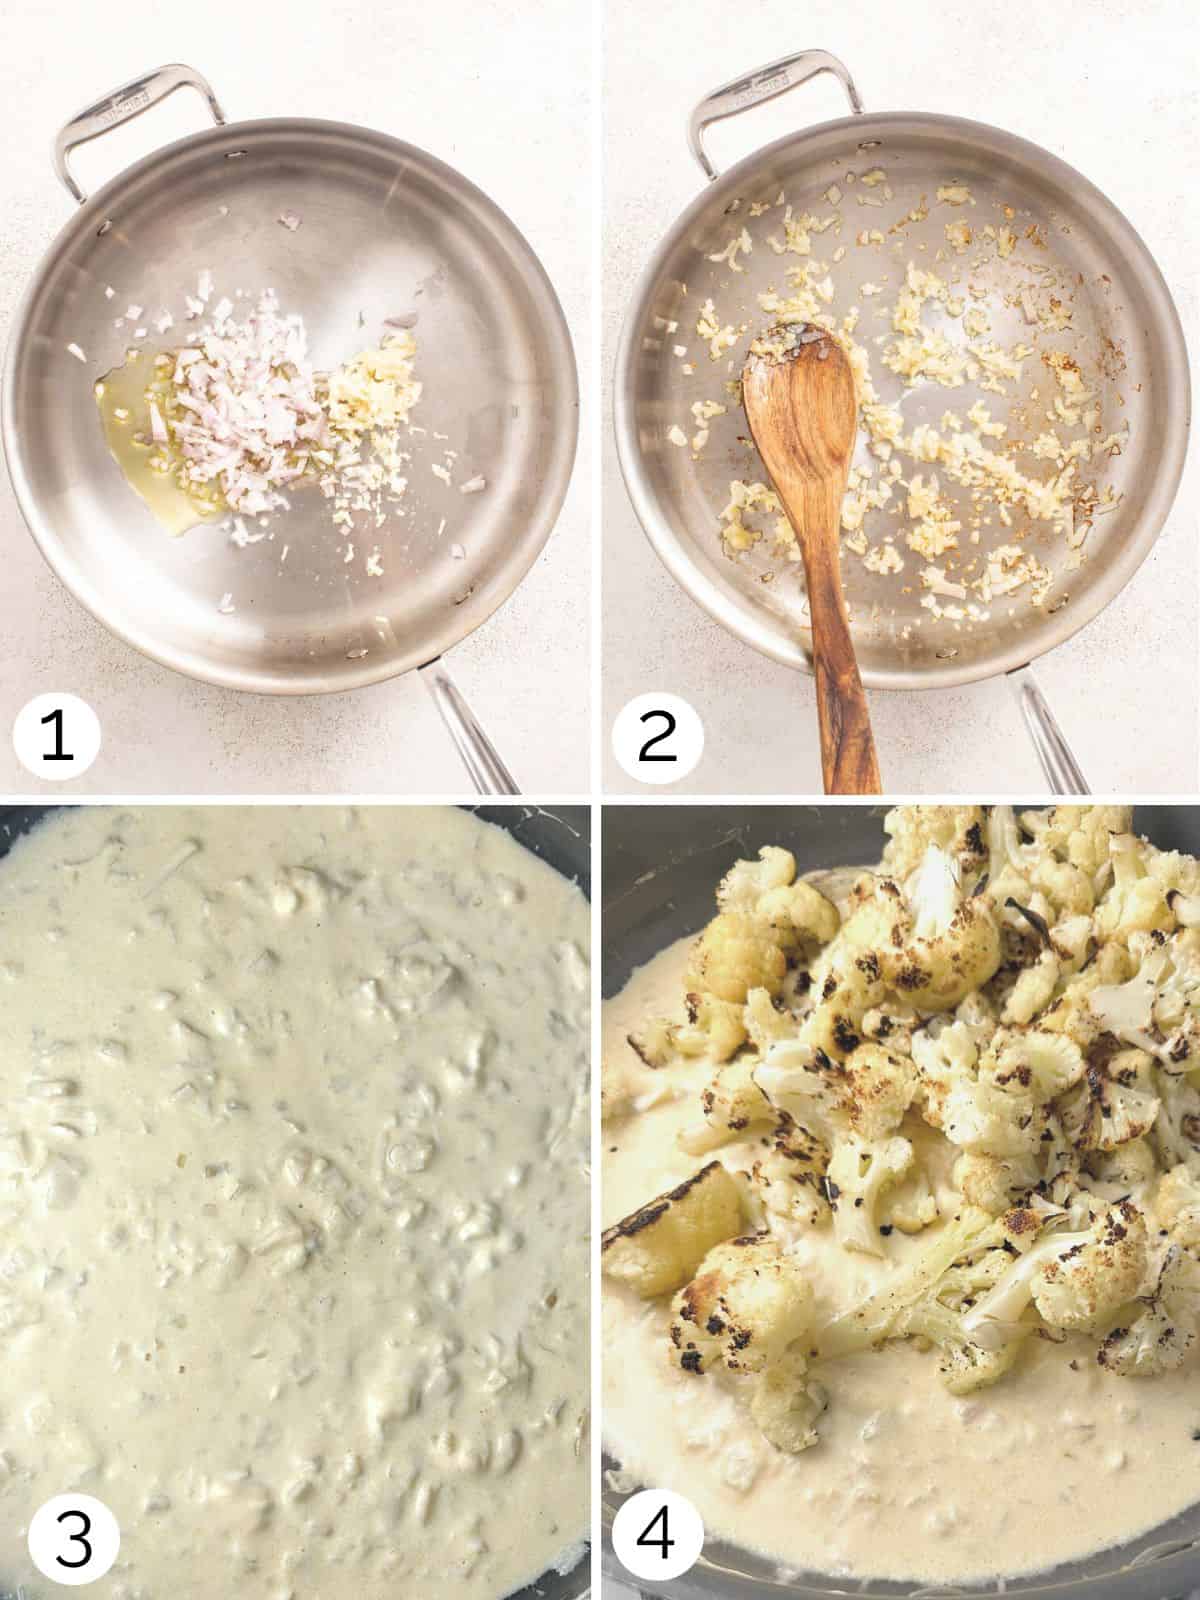 Process of making cheese sauce for cauliflower and stirring in the cauliflower.